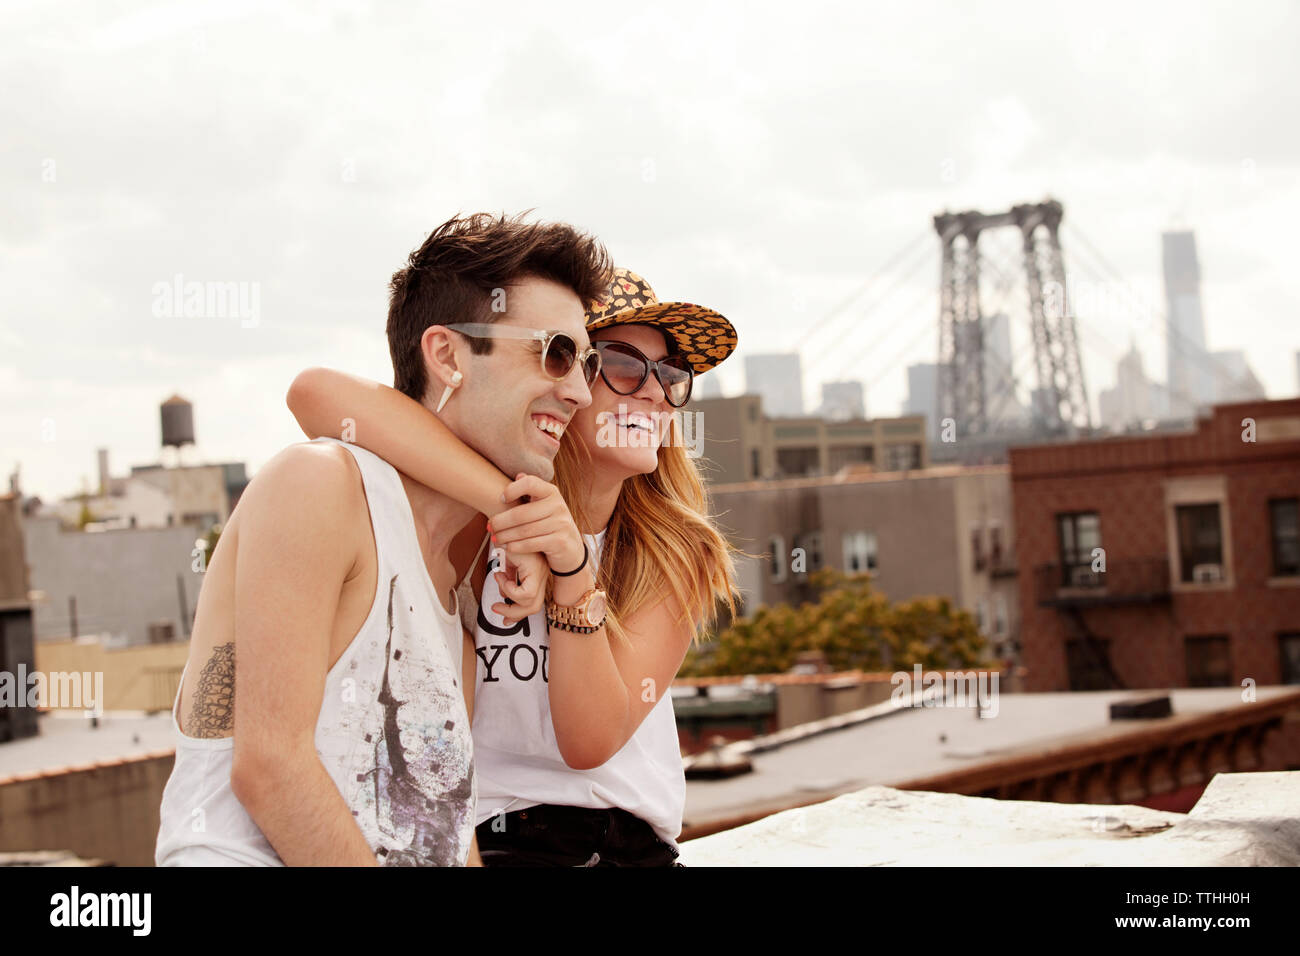 Cheerful woman embracing boyfriend at building terrace Stock Photo